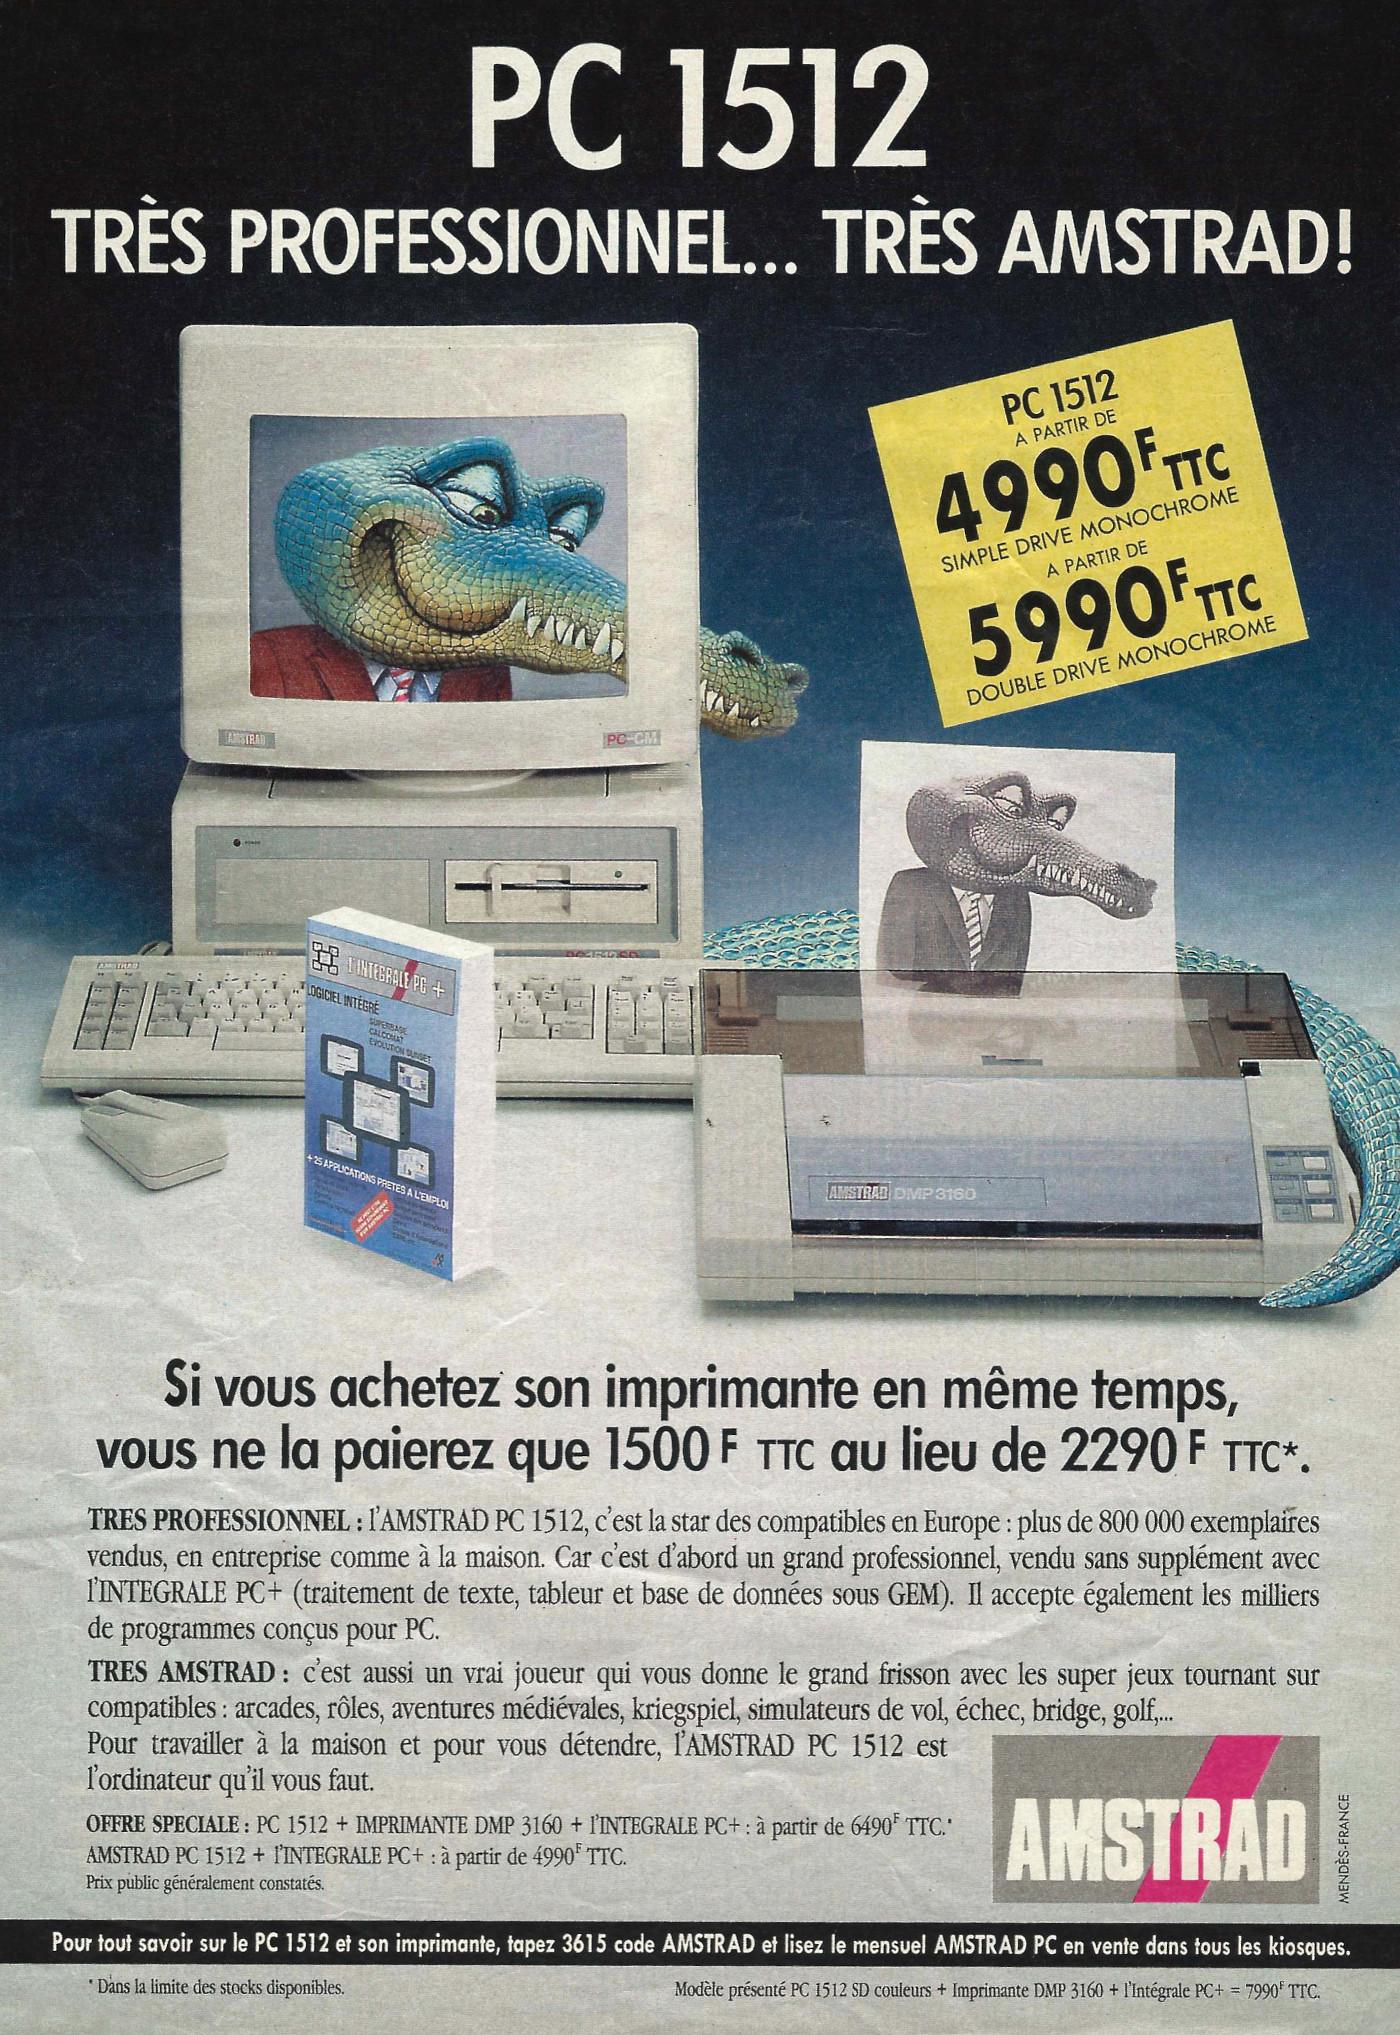 An Amstrad advert placed in a French magazine, showing the PC 1512 in a bundle offer w<span class='hilite'>it</span>h a printer for 1500F instead of 2290F, which is about a £79 discount, or £250 in 2024. The advert also claims that more than 800,000 1512s had been sold to businesses and home users.